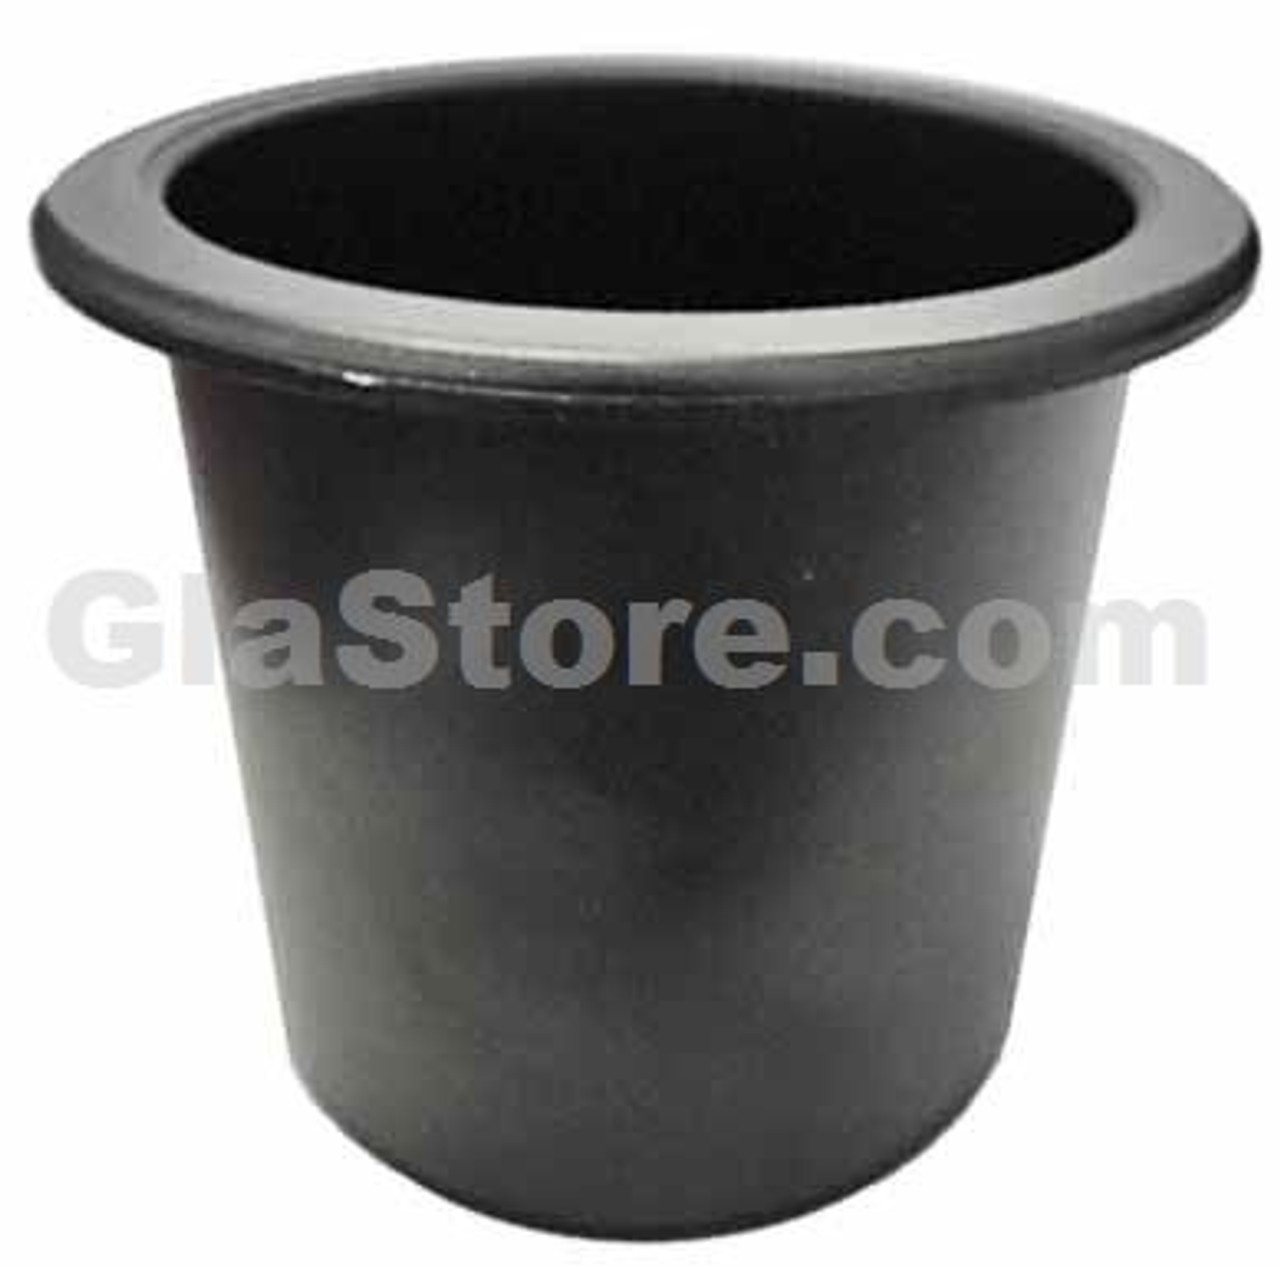 Black Plastic Cup Insert for Installing New Cup Holder 1.5 Deep x 2.75 Dia